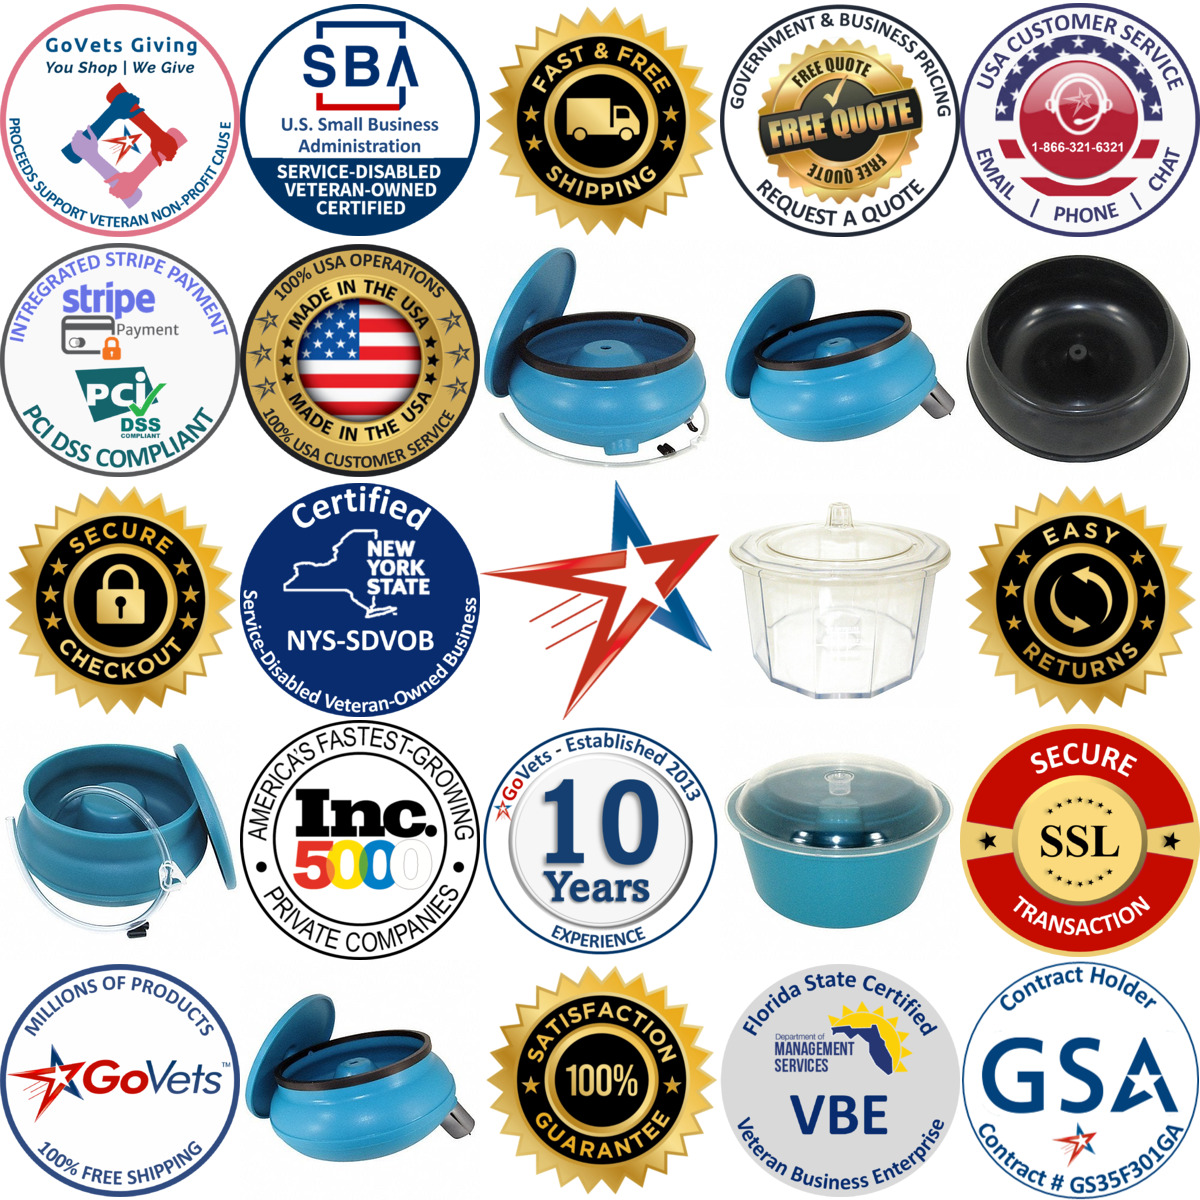 A selection of Tumbler Bowls and Lids products on GoVets